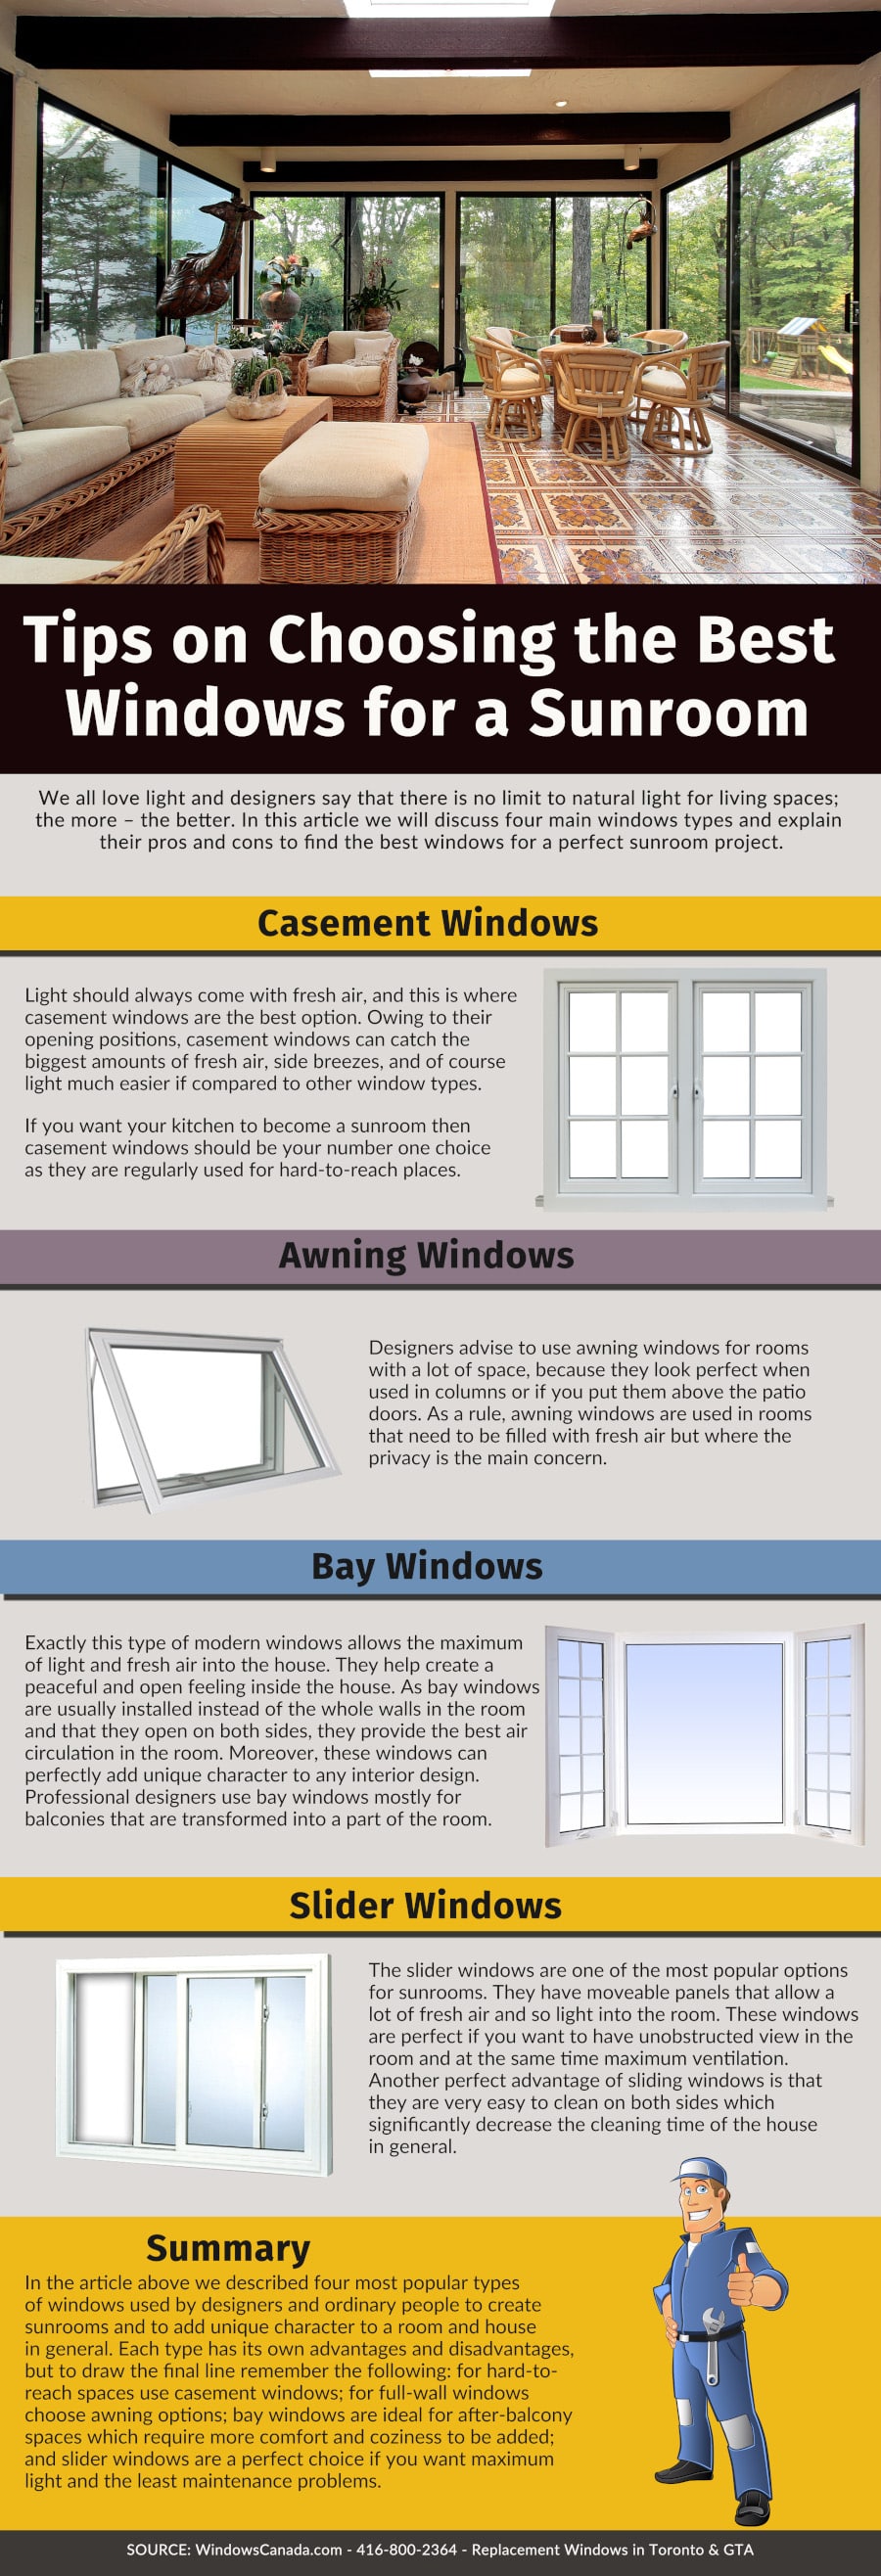 Tips on Choosing the Best Windows for a Sunroom